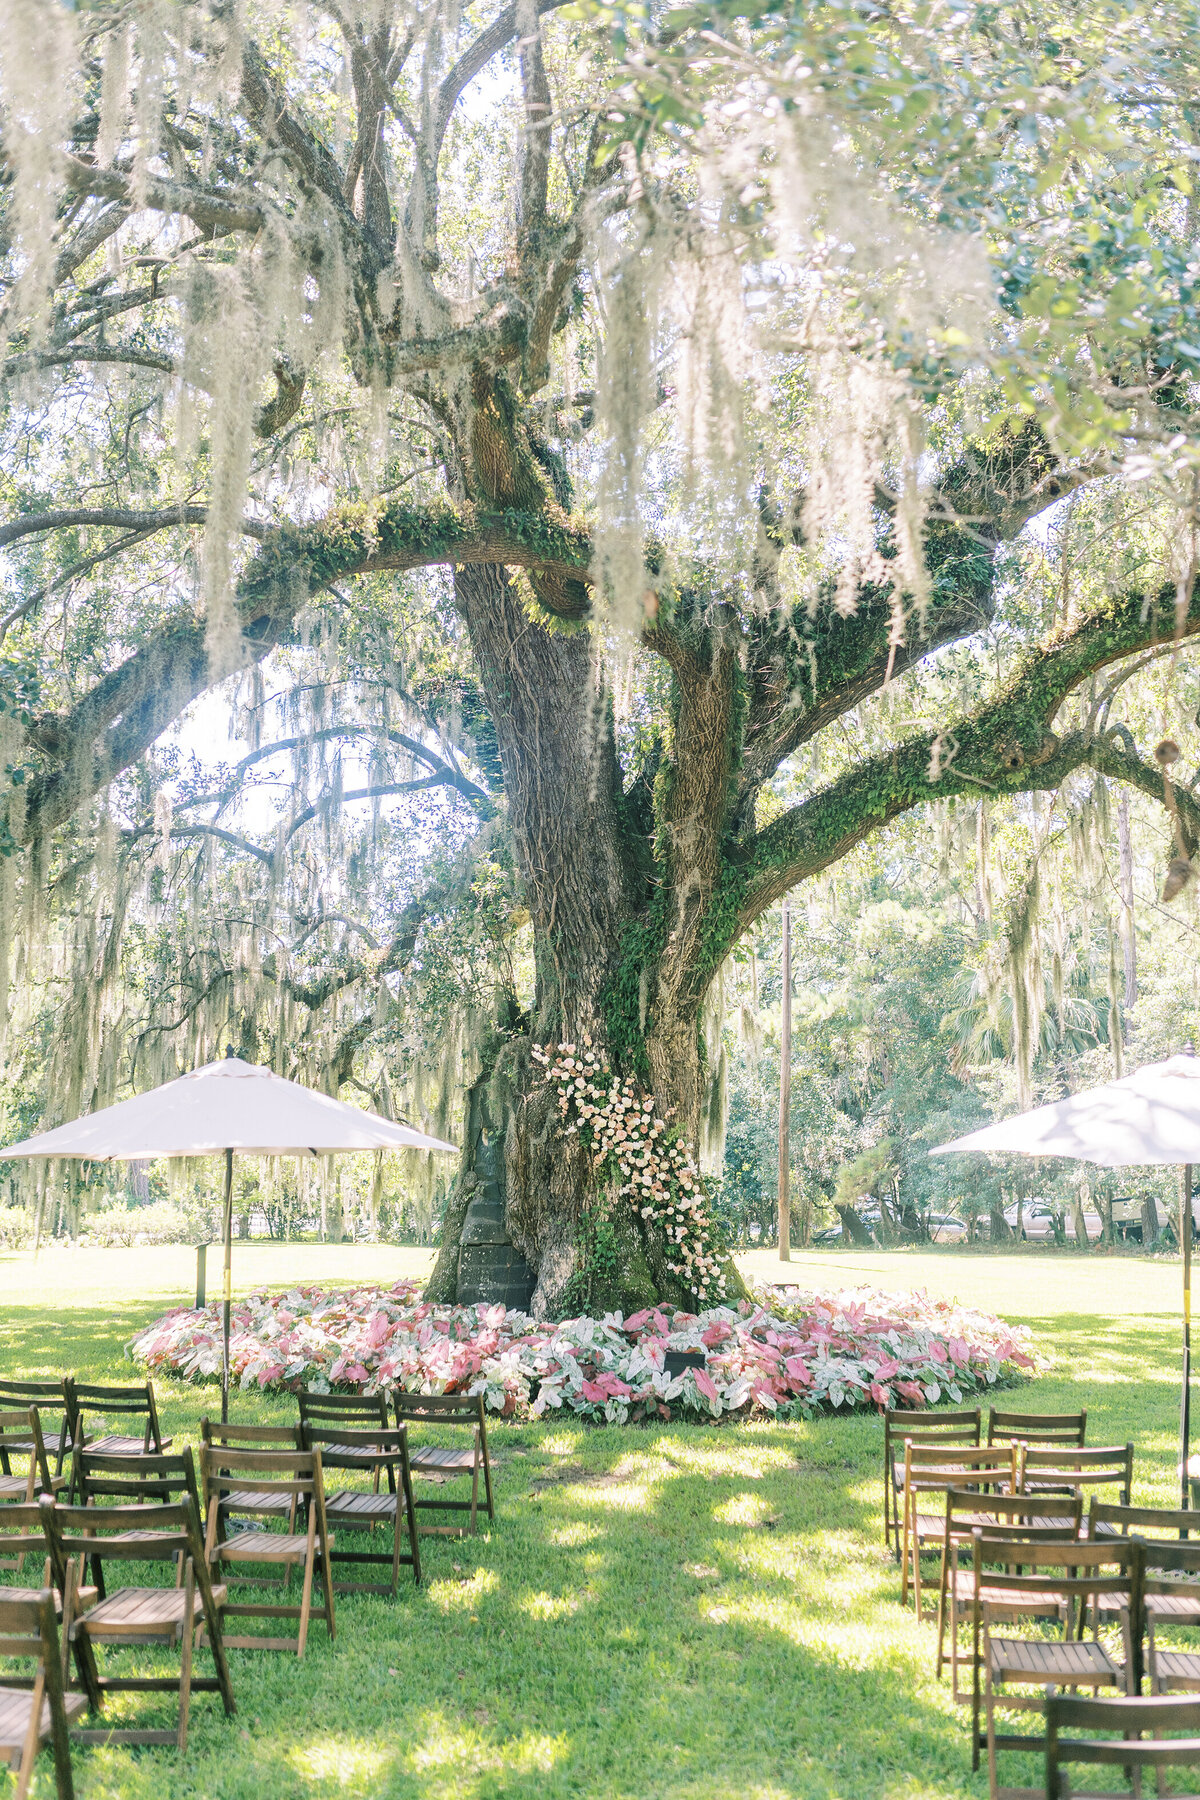 Kathryn + Will | Wedding at Magnolia Plantation by Pure Luxe Bride: Charleston Wedding and Event Planners